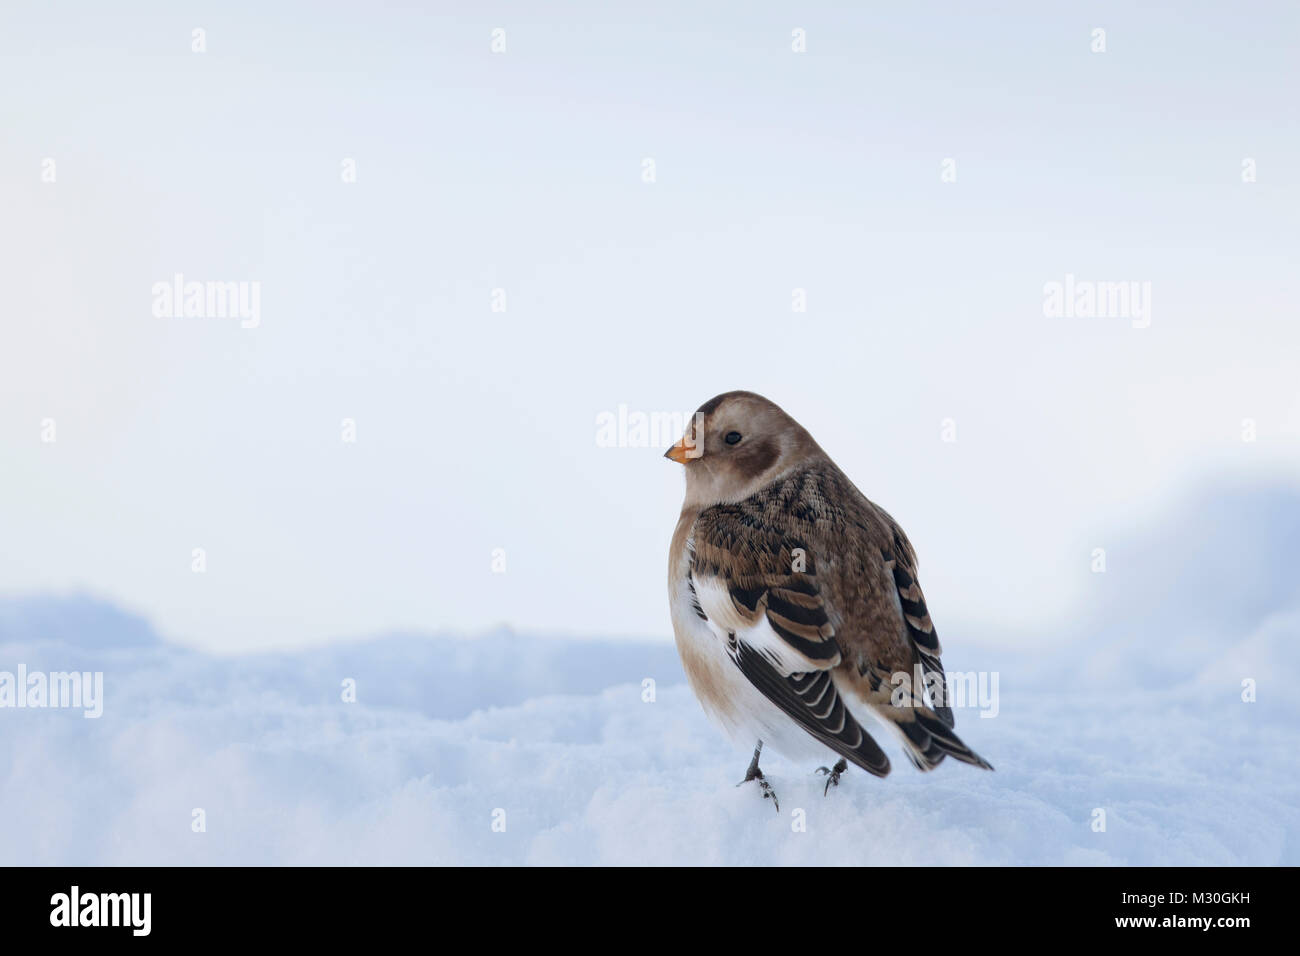 Snow bunting in snow looking over shoulder Stock Photo